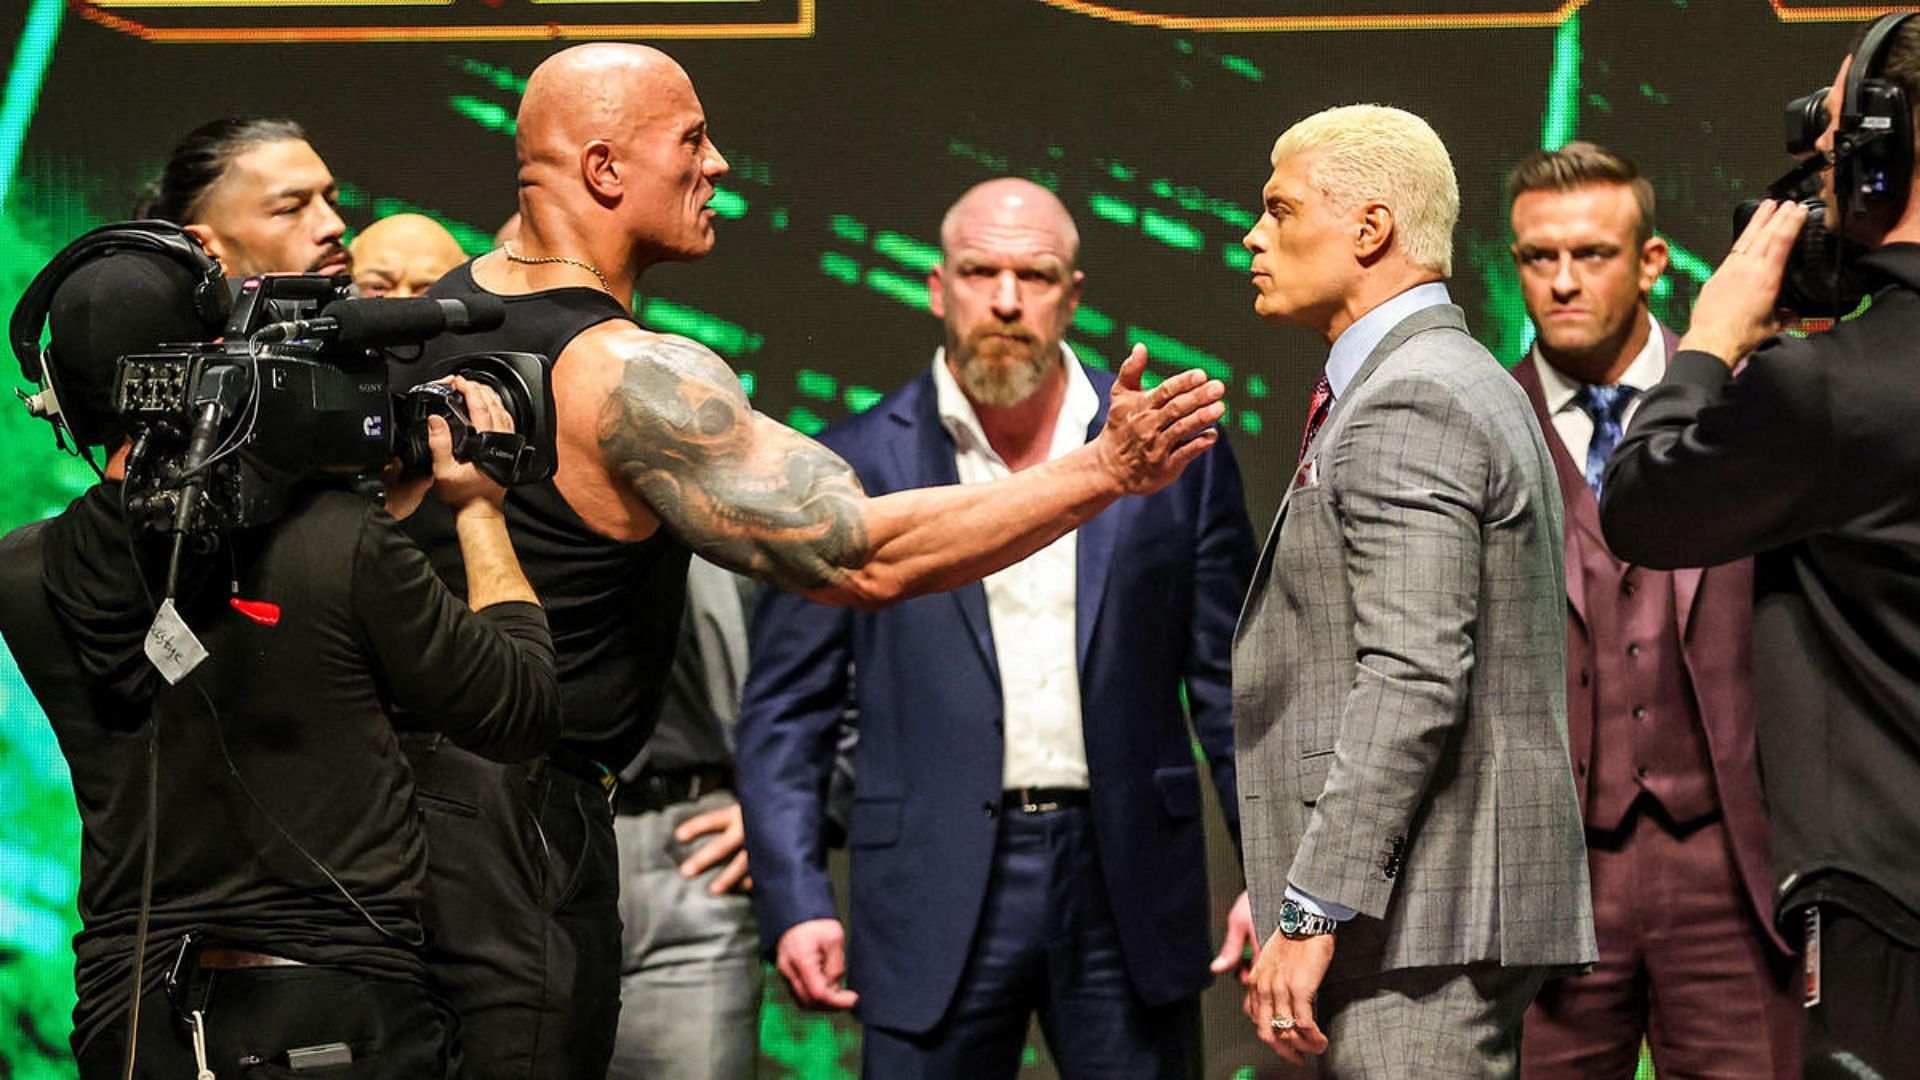 The Rock unexpectedly slapped Cody Rhodes at the WrestleMania XL Kickoff presser.